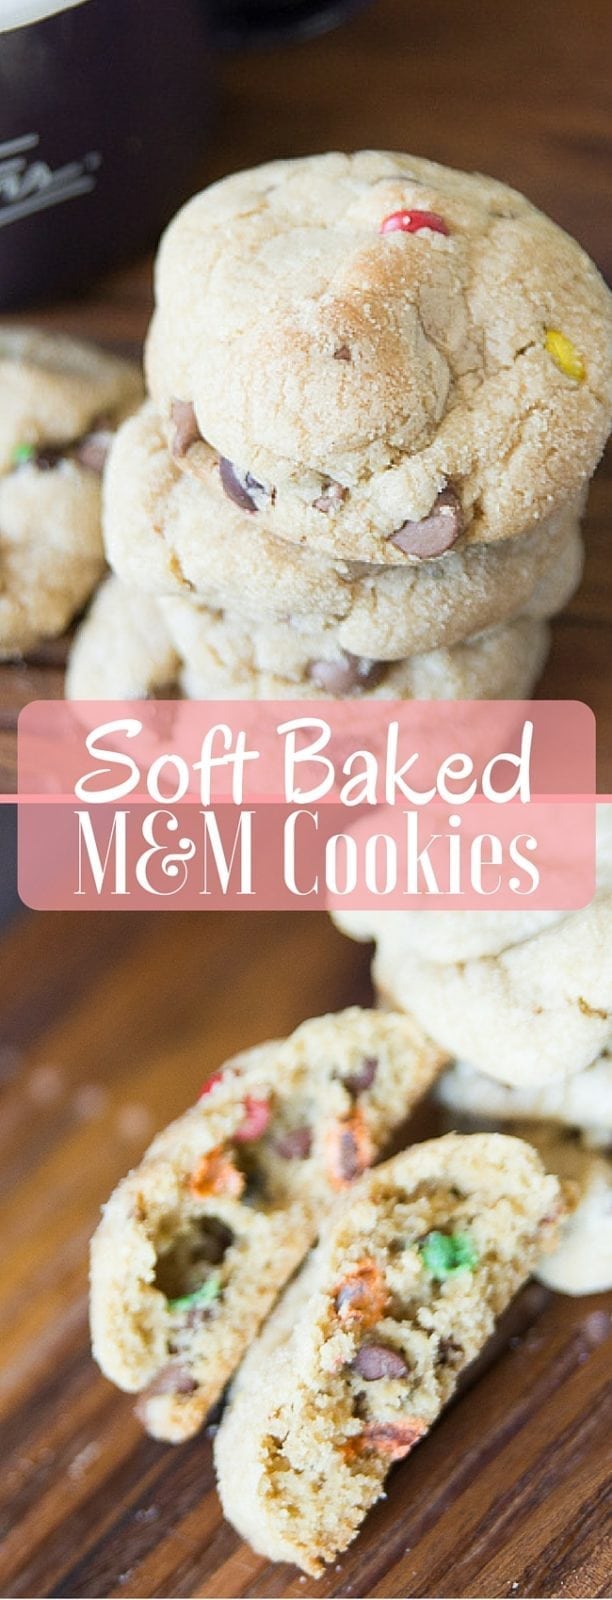 Soft Baked M&M Cookies Recipe